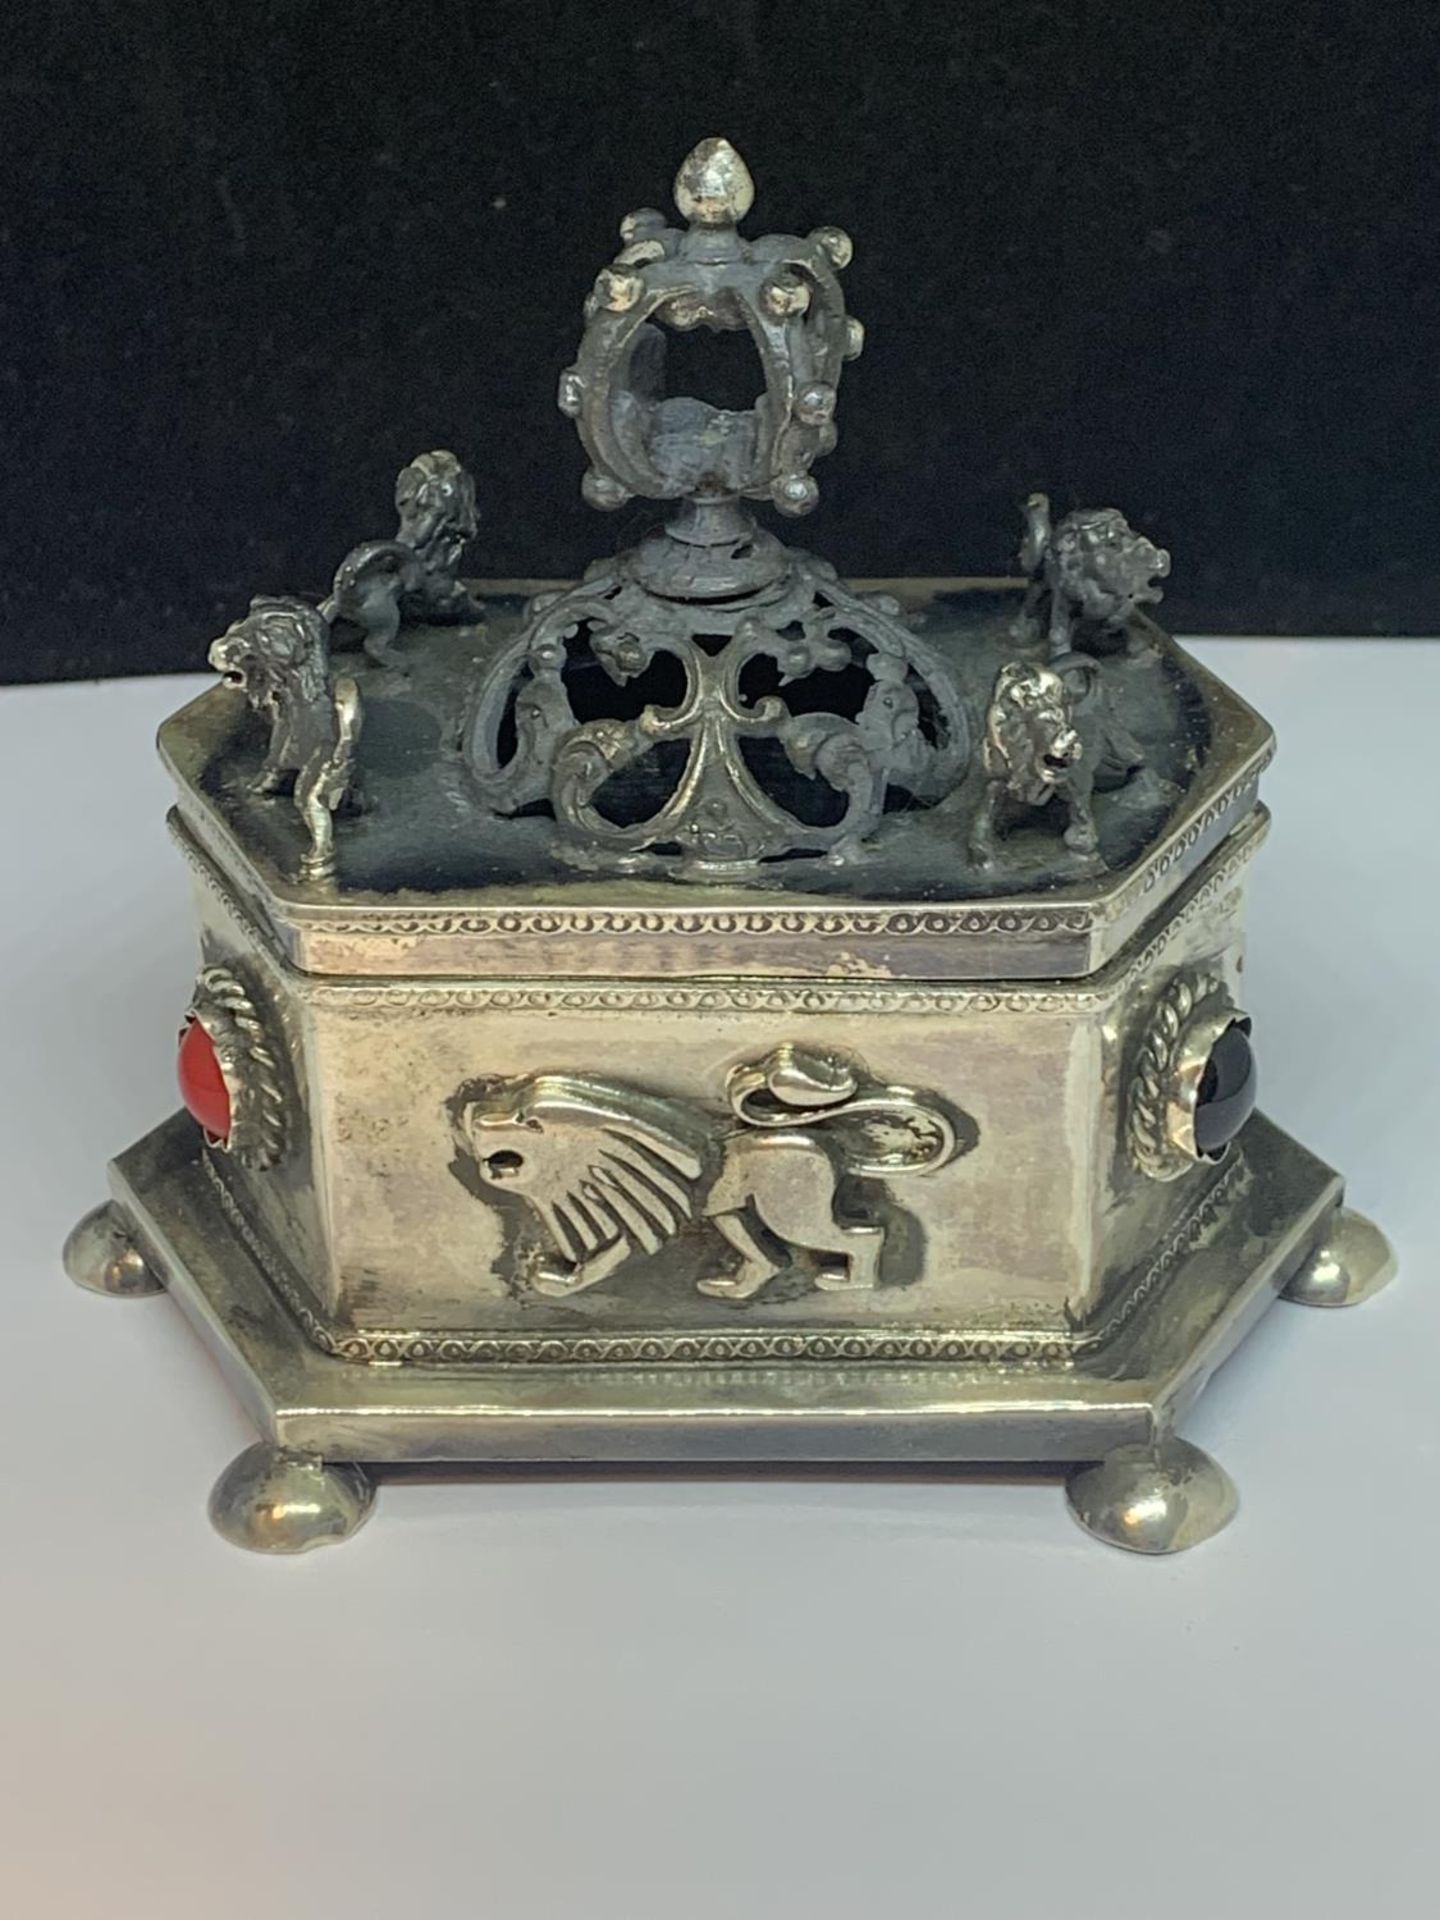 A HIGHLY DECORATIVE RUSSIAN MARKED SILVER SIX SIDED AND LIDDED JUDICA BOX WITH LID FEATURING FOUR